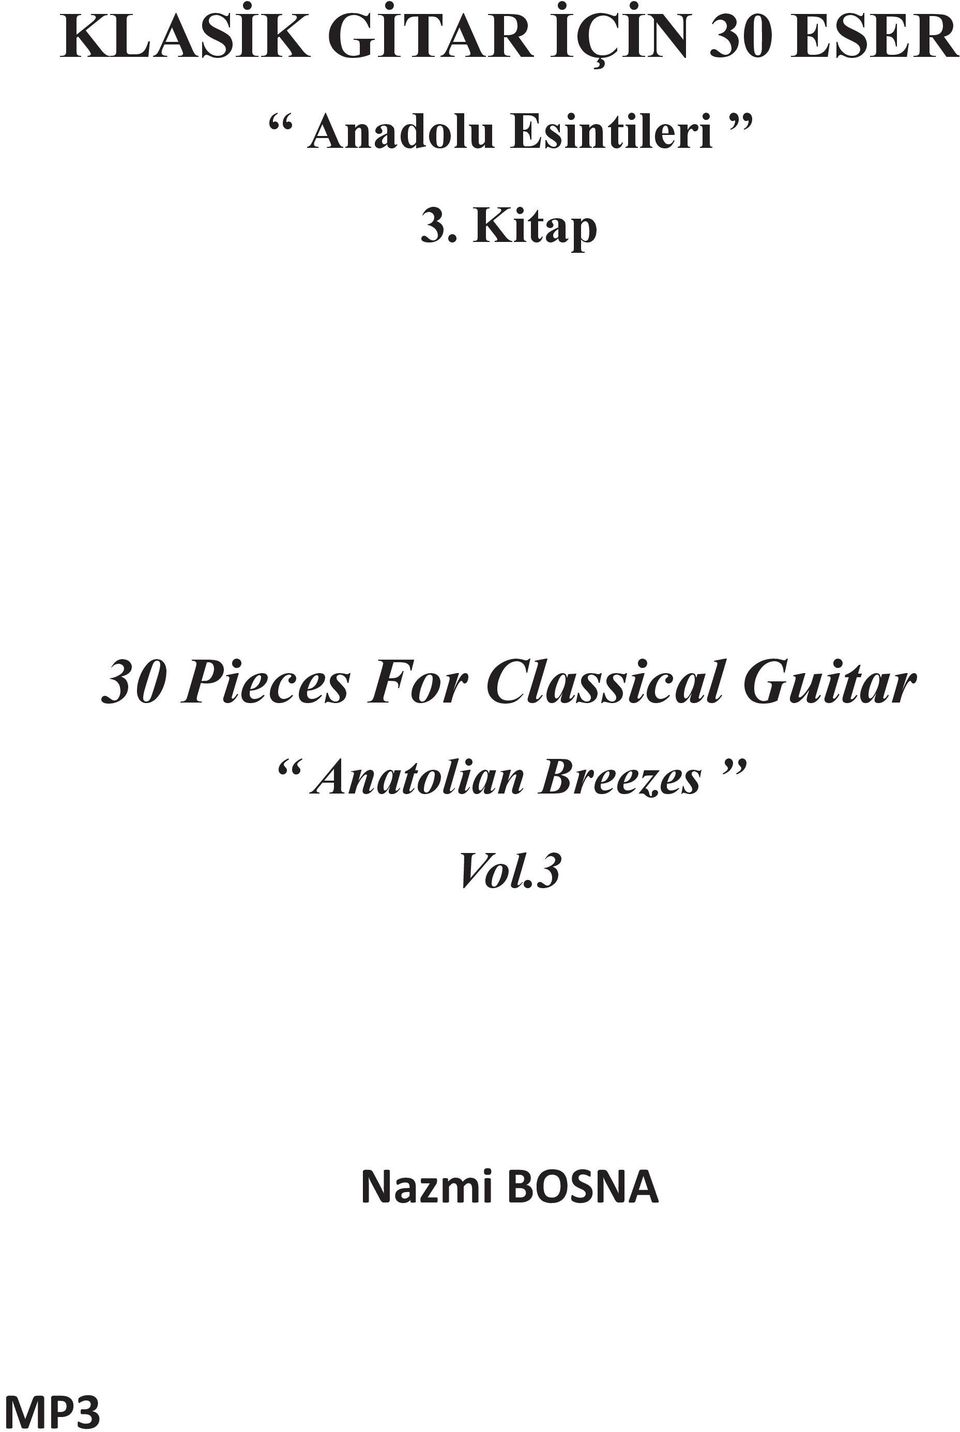 Kitap Pieces For Classical